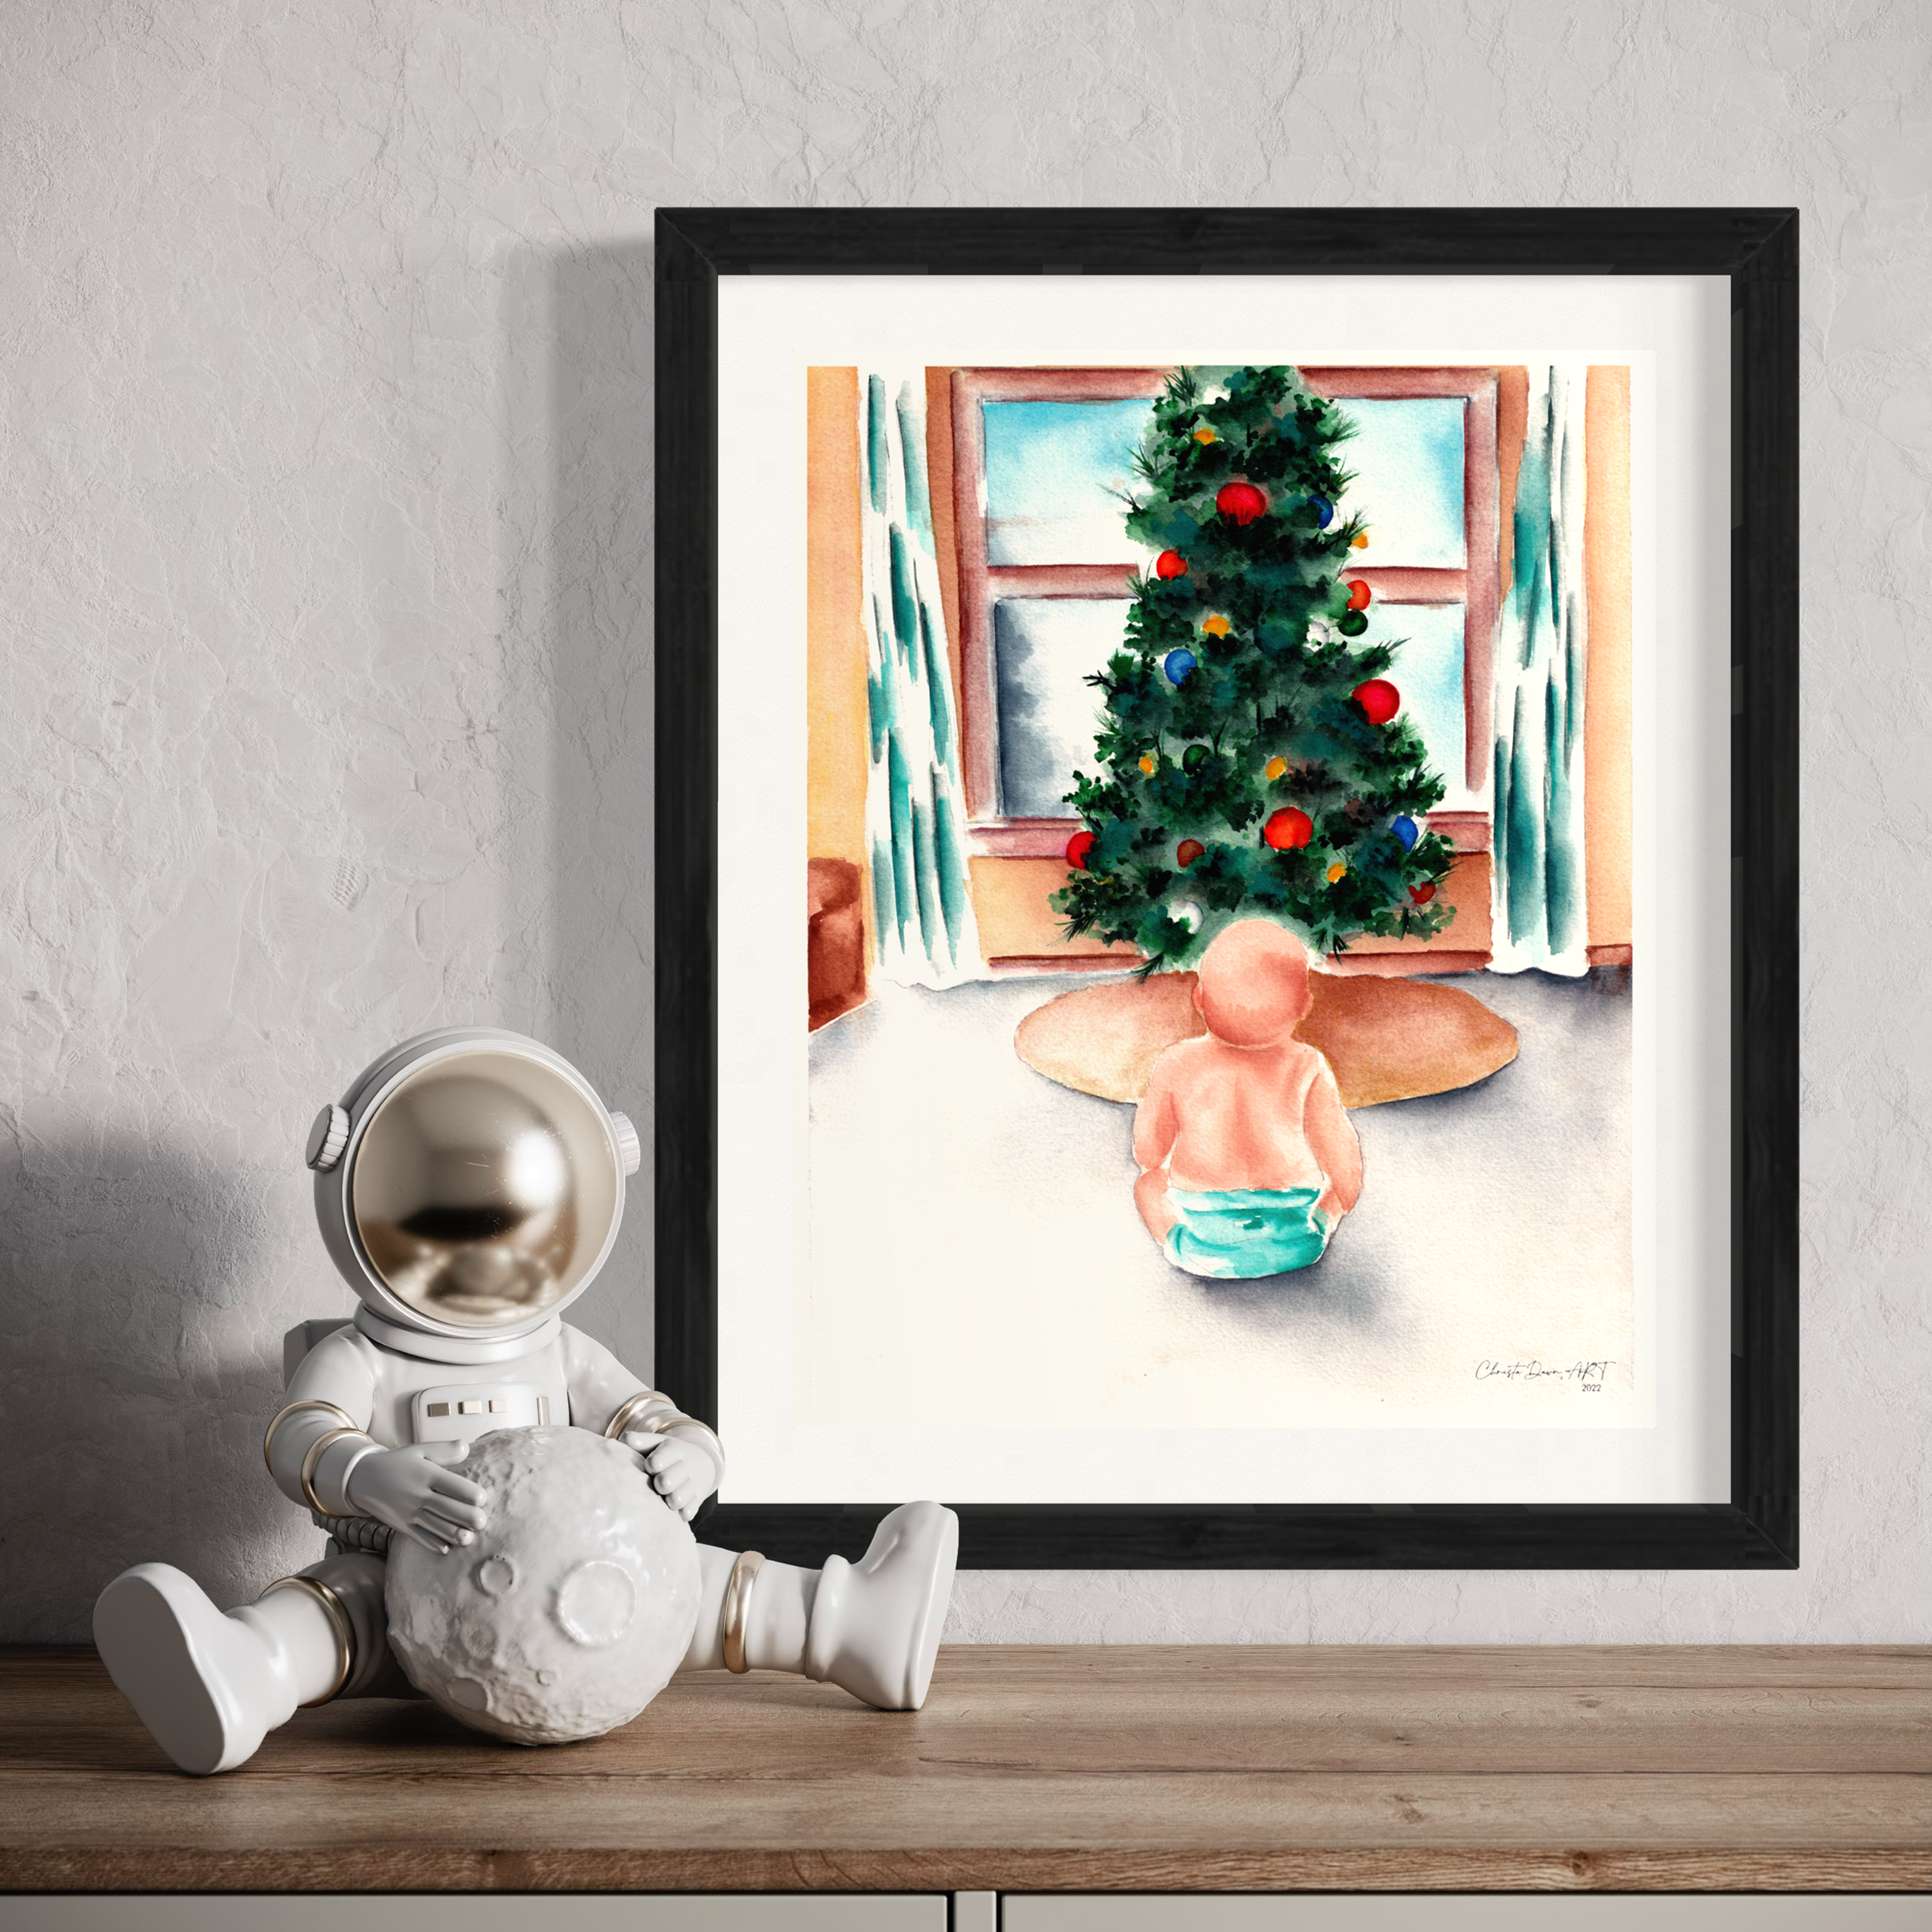 Child at Christmas print in boy’s room